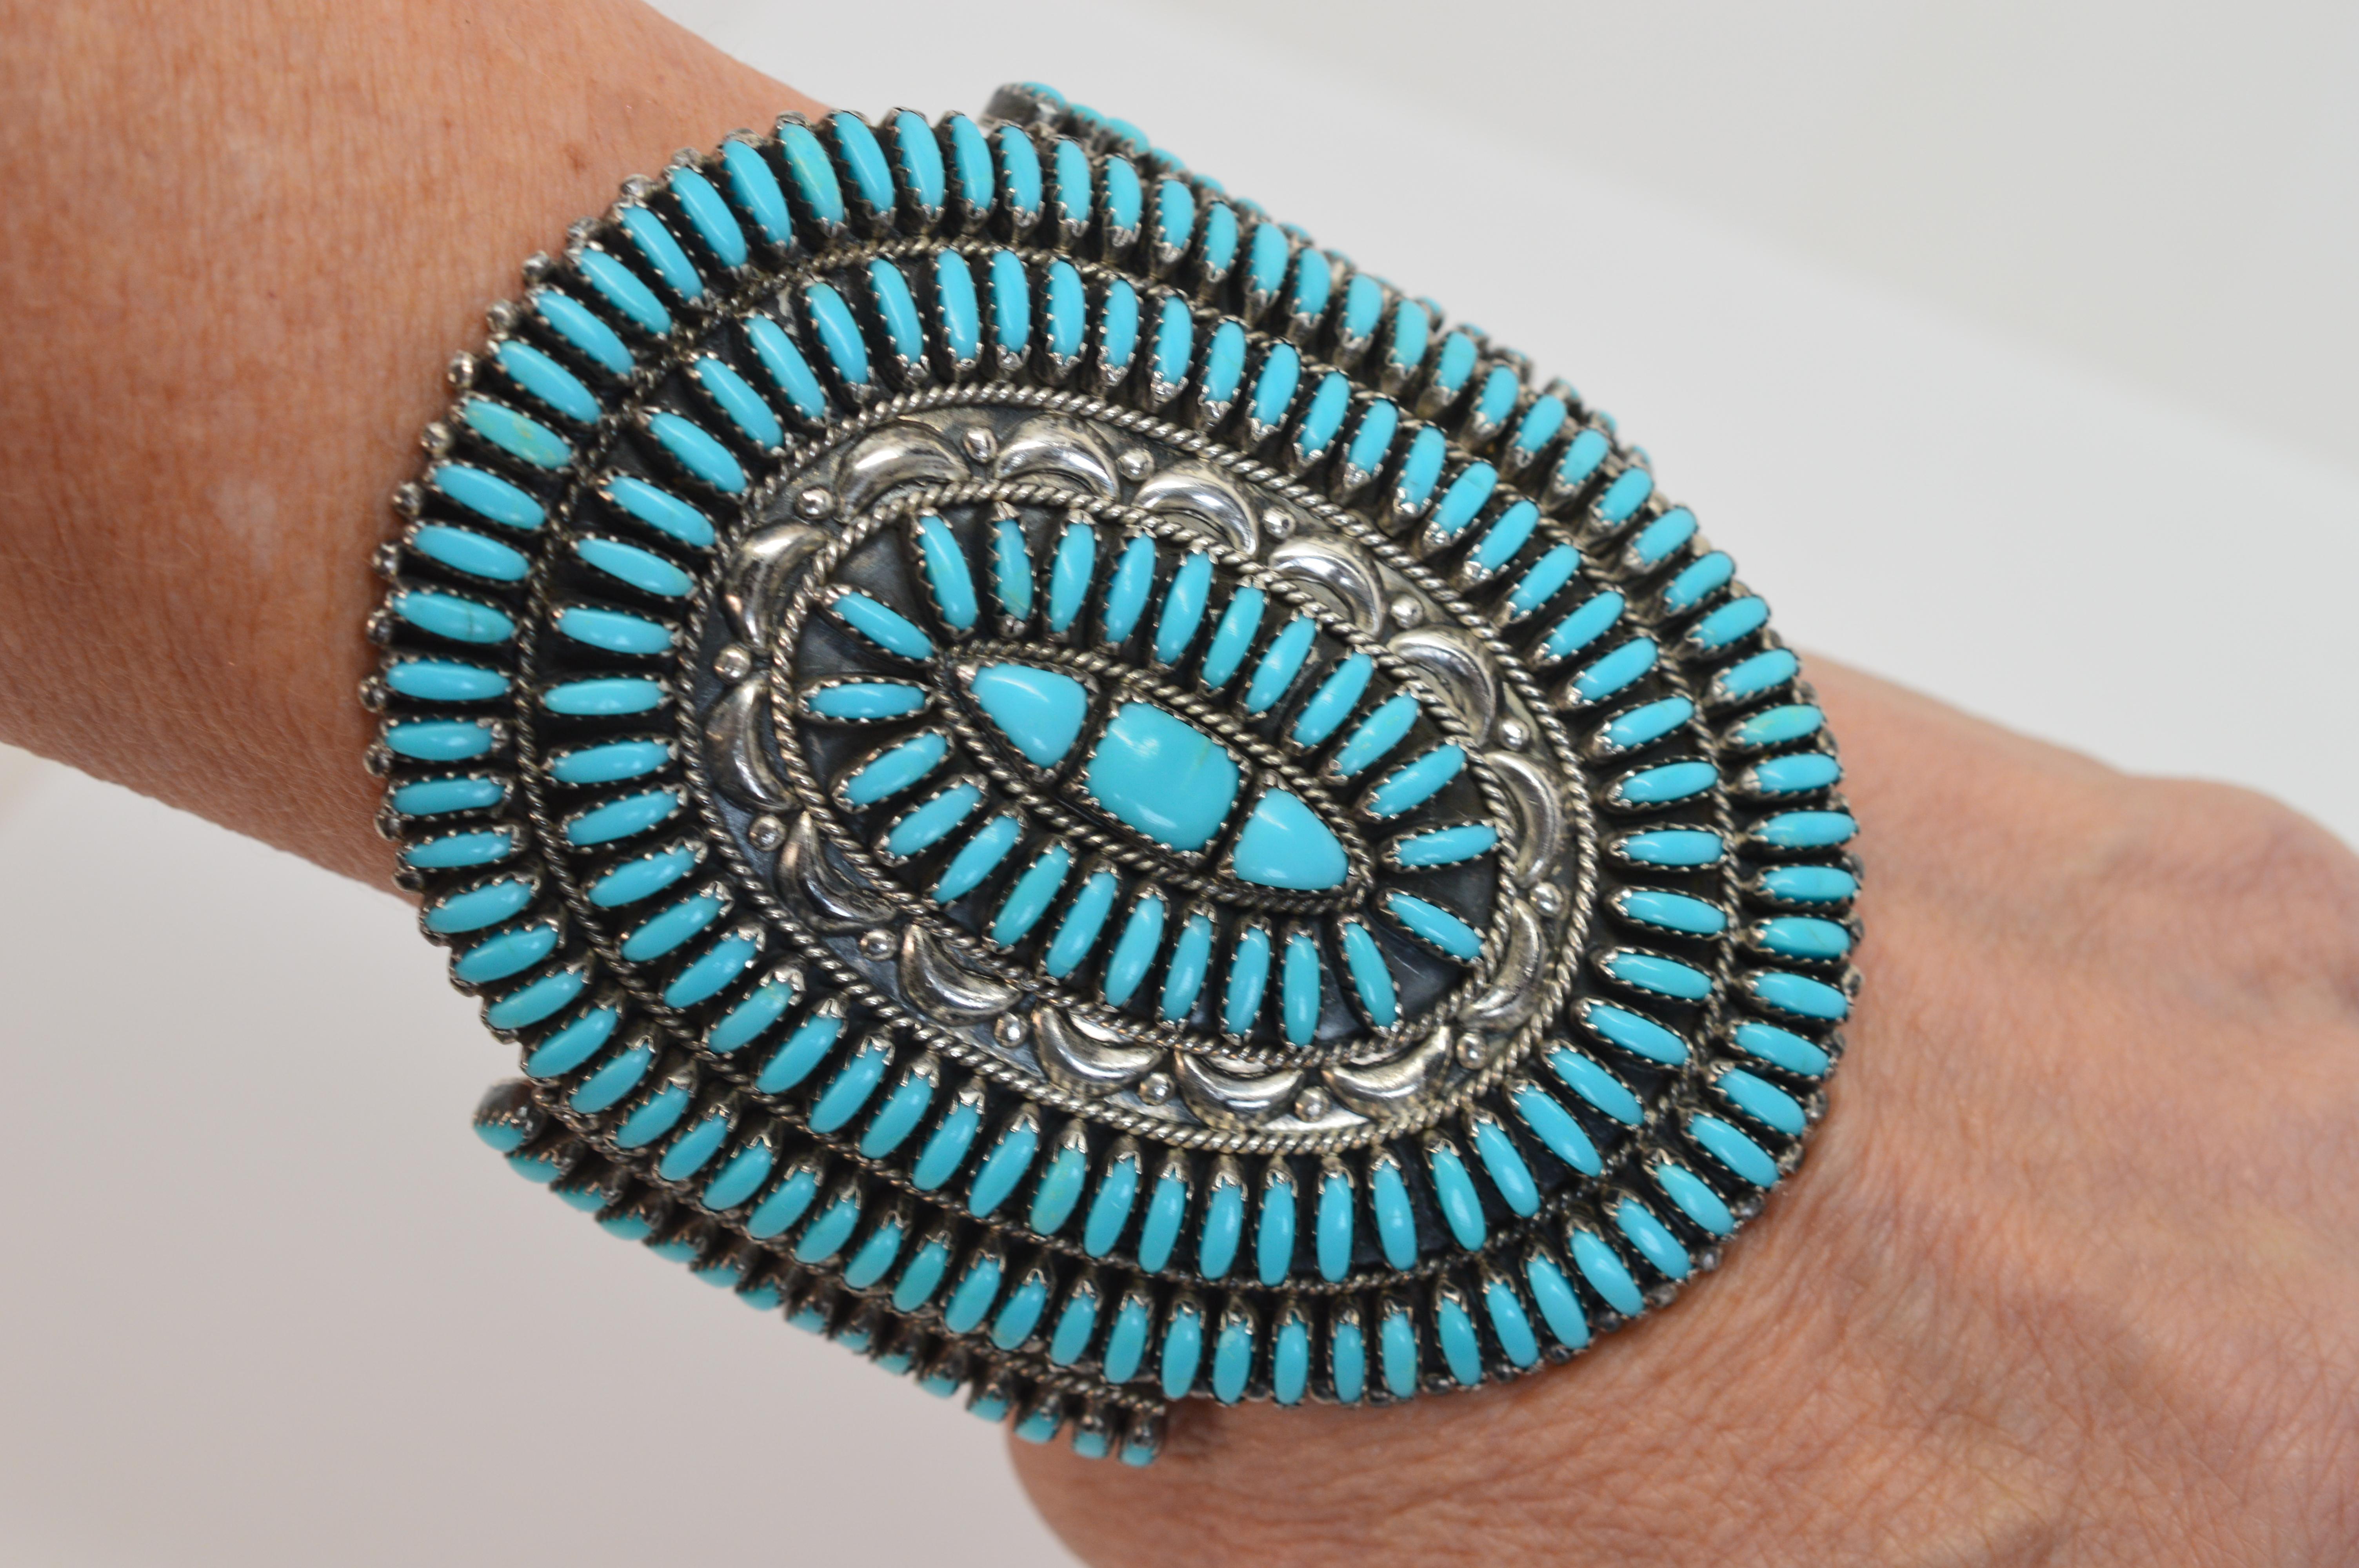 Native American Zuni Needlepoint Turquoise Cluster Cuff Sterling Silver Bracelet